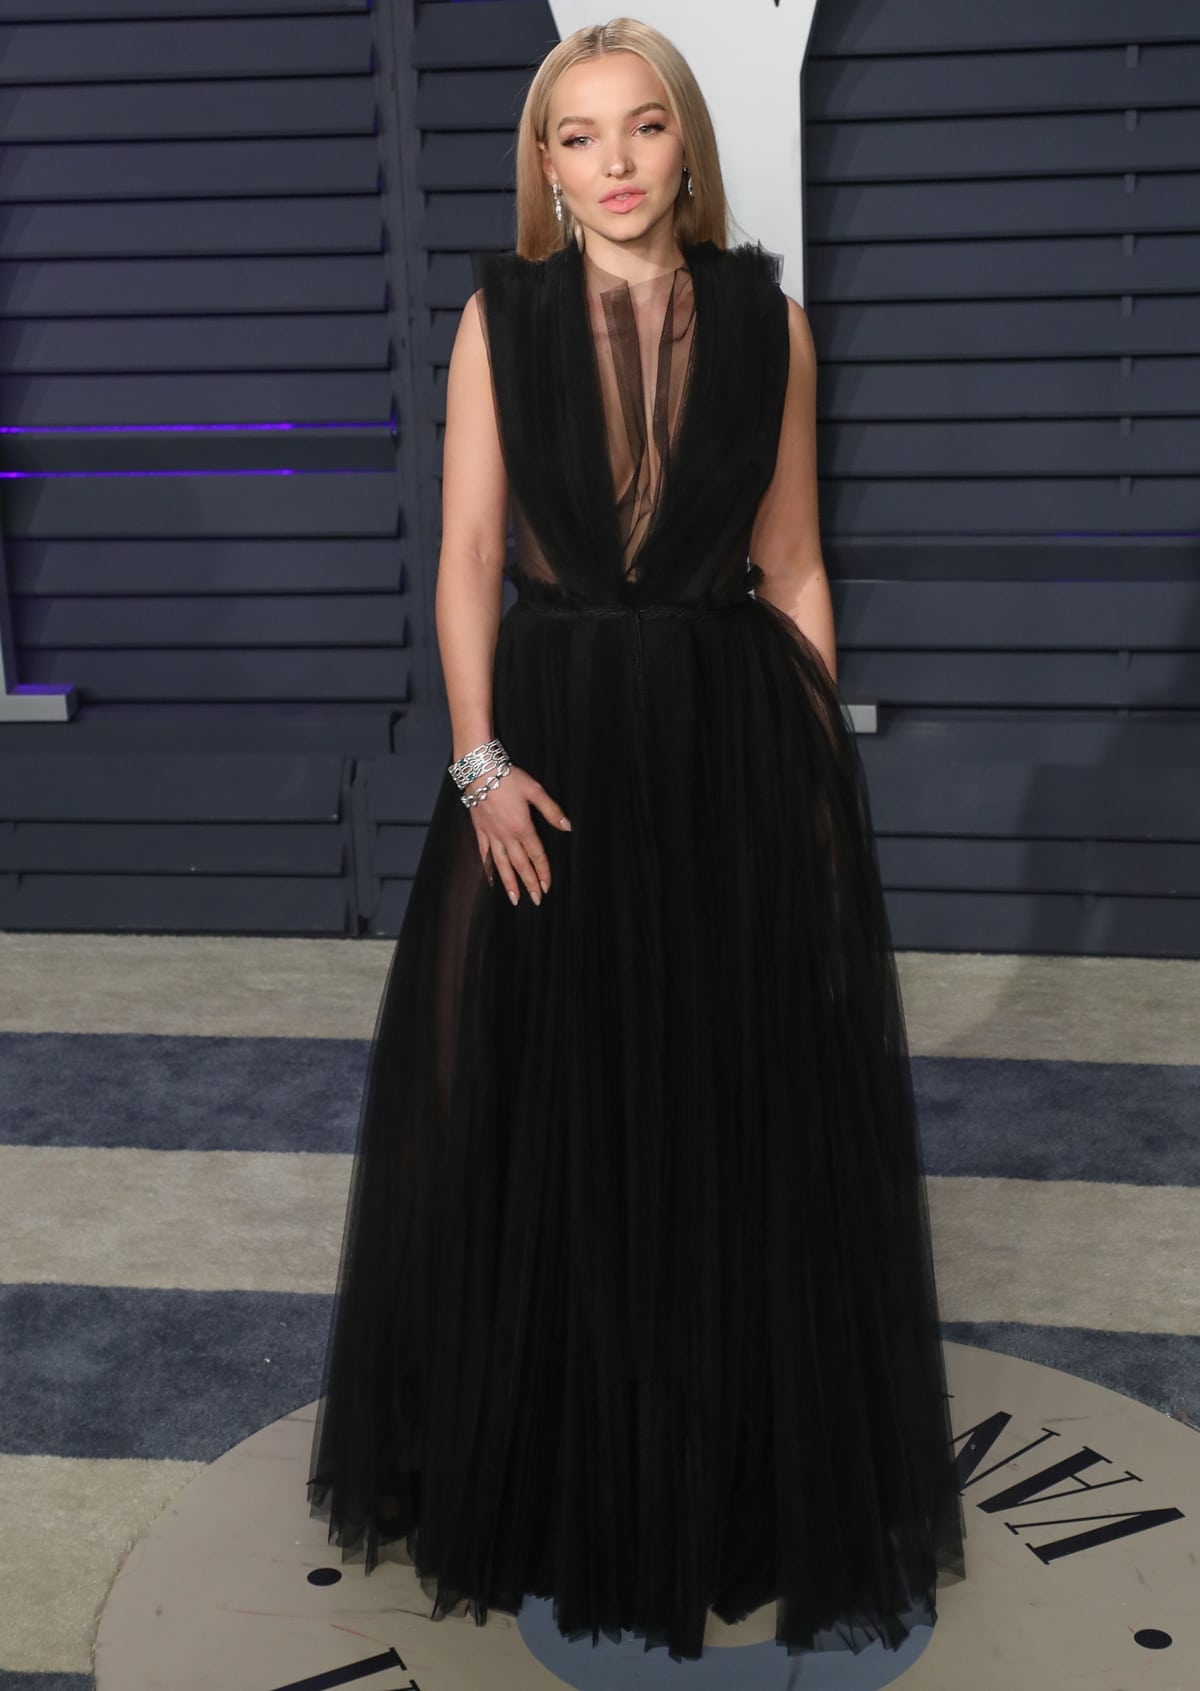 Dove Cameron in a black Adeam gown with Serpenti earrings and a Serpenti bracelet by Bulgari at the 2019 Vanity Fair Oscar Party